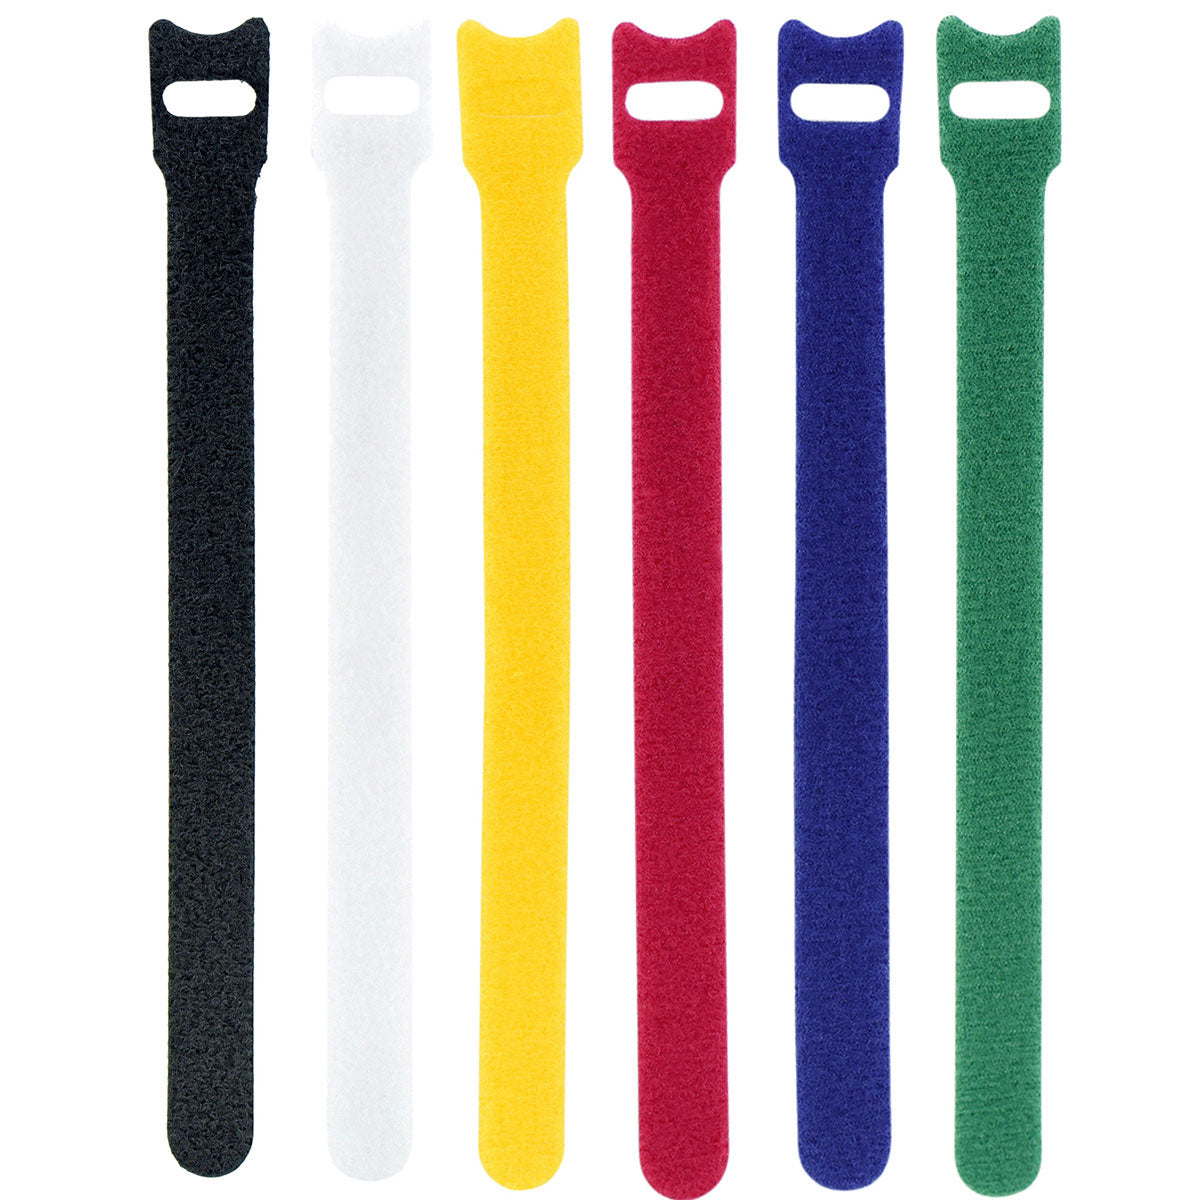 6 Mixed Color Hook and Loop Cable Ties 50 Pieces